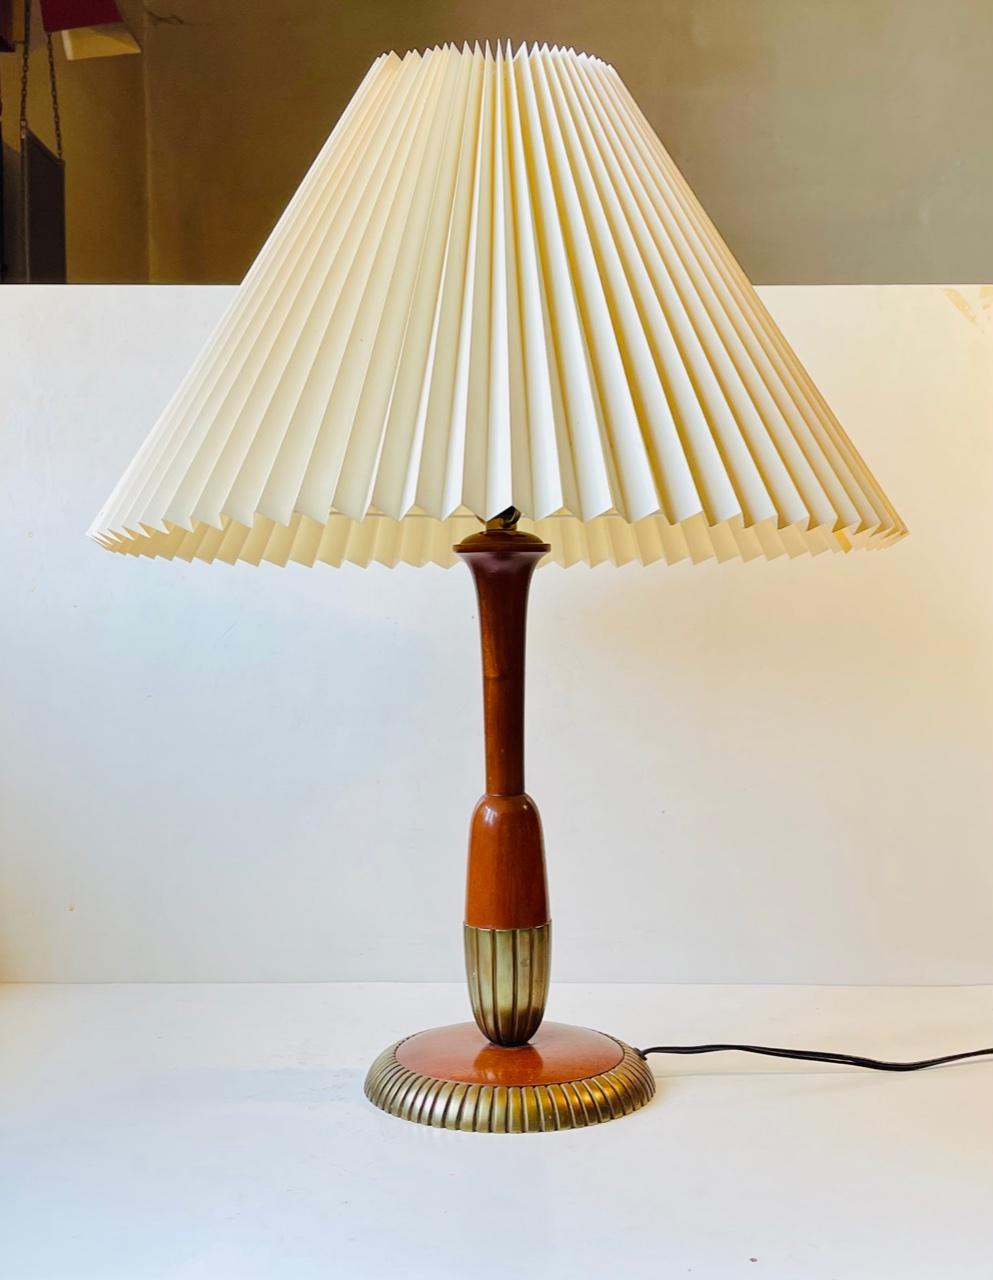 Scandinavian made Art Deco styled table light in walnut fluted brass. Probably made by either Falkenbergs Amaturar, Nordiska Kompagniet or Bergboms in Sweden circa 1950. This fixture features brass shade holder and on/of switch to the bakelite